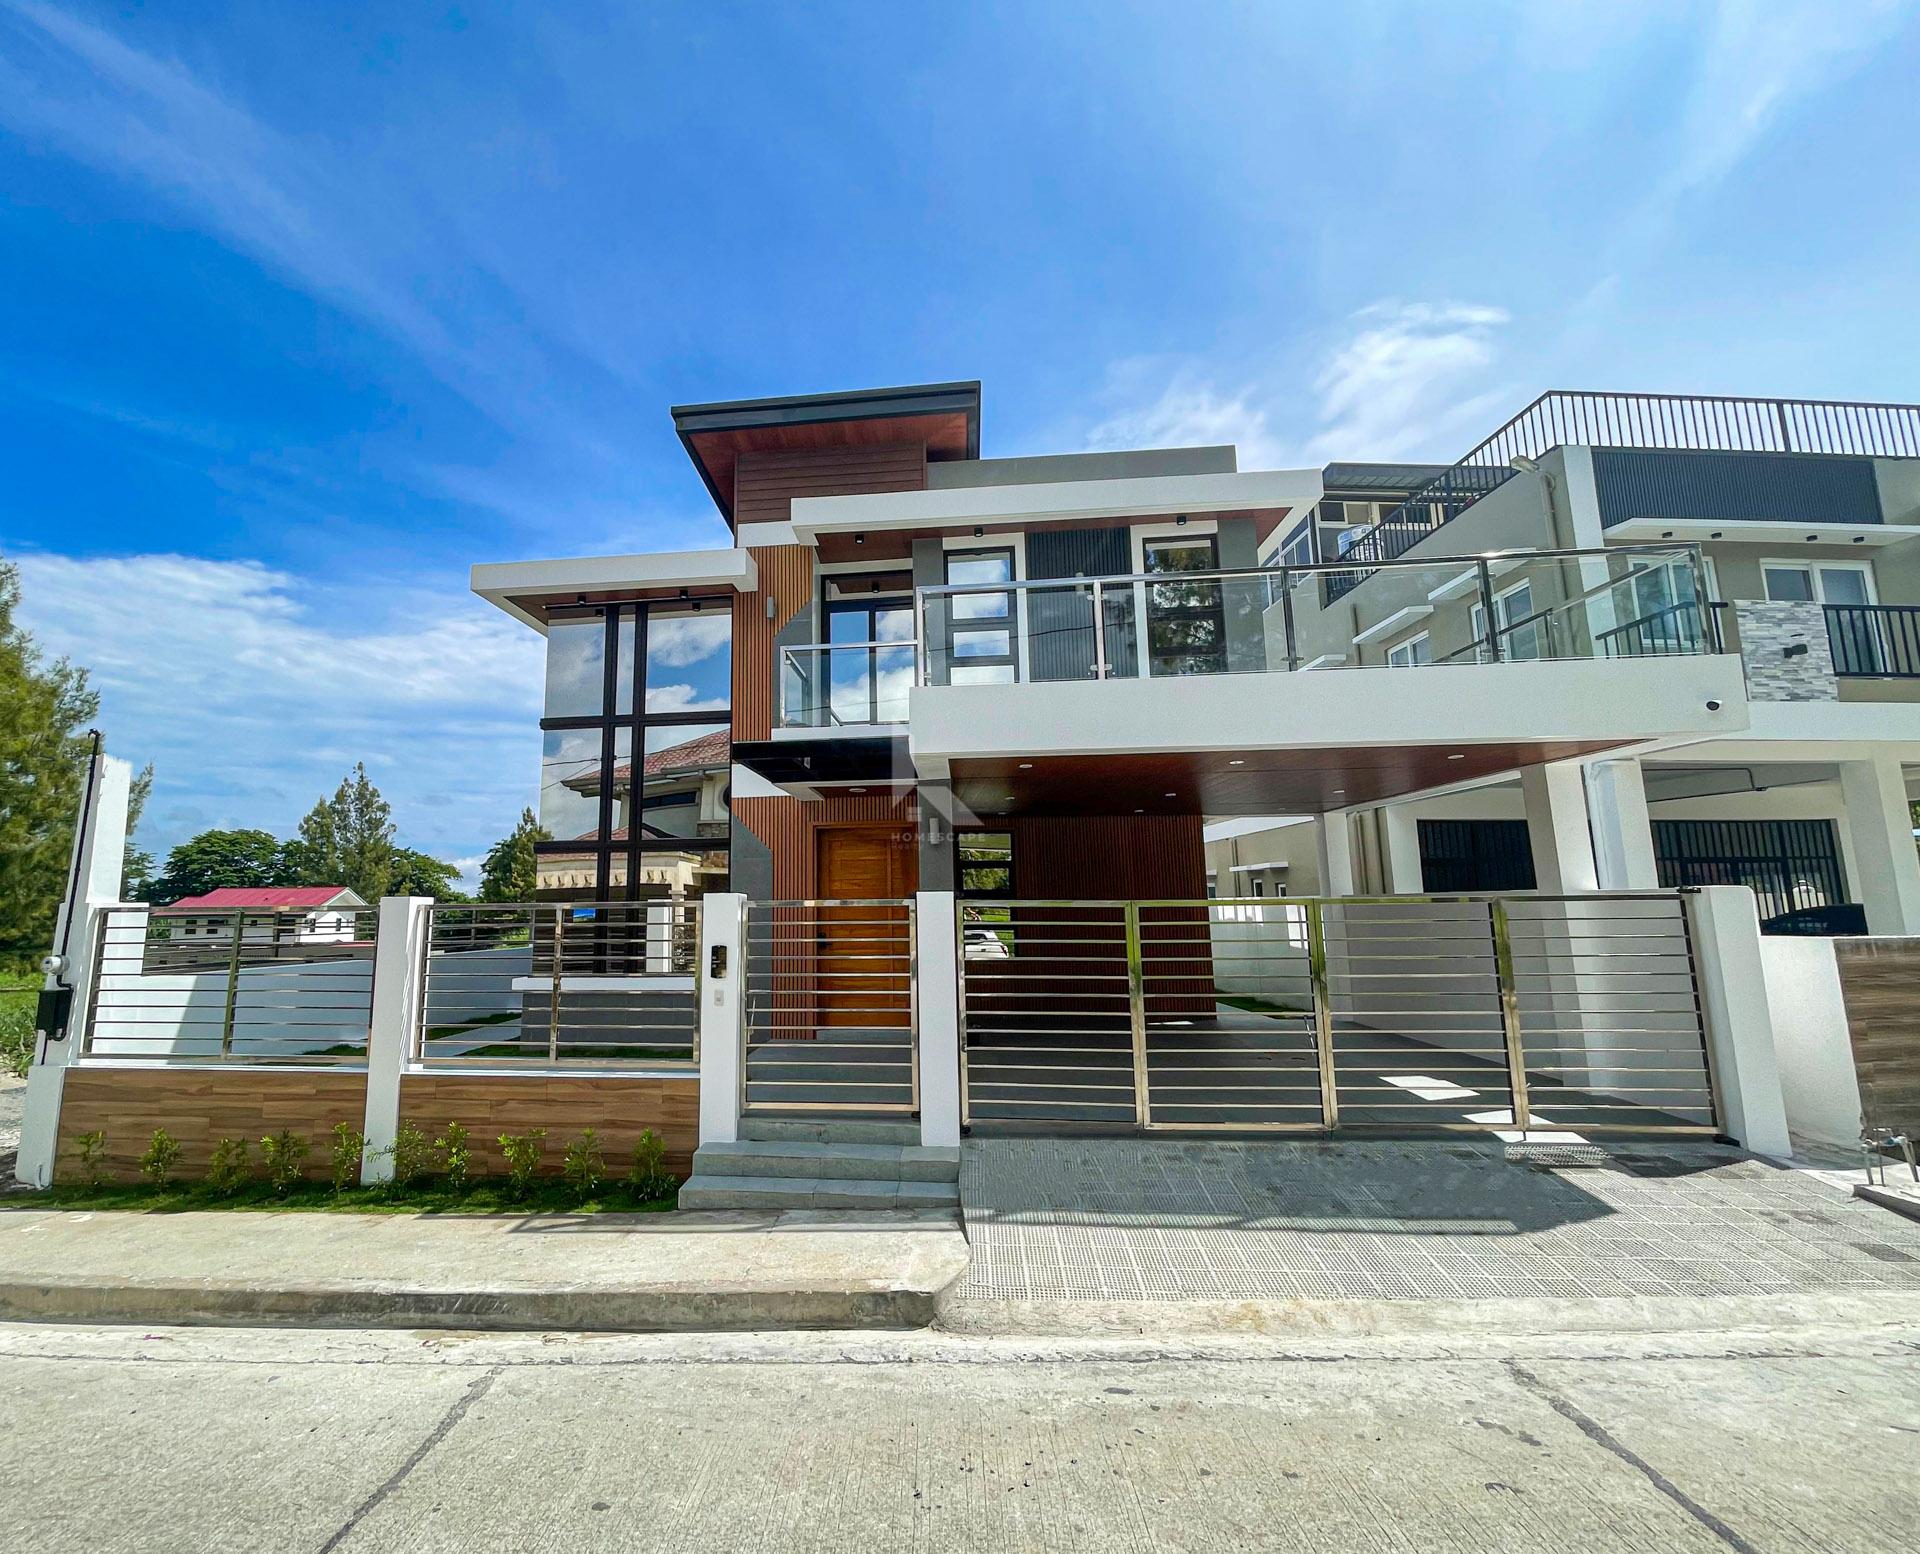 Astonishing Brand New Elegant and Spacious Modern Contemporary House For Sale in Tagaytay City 